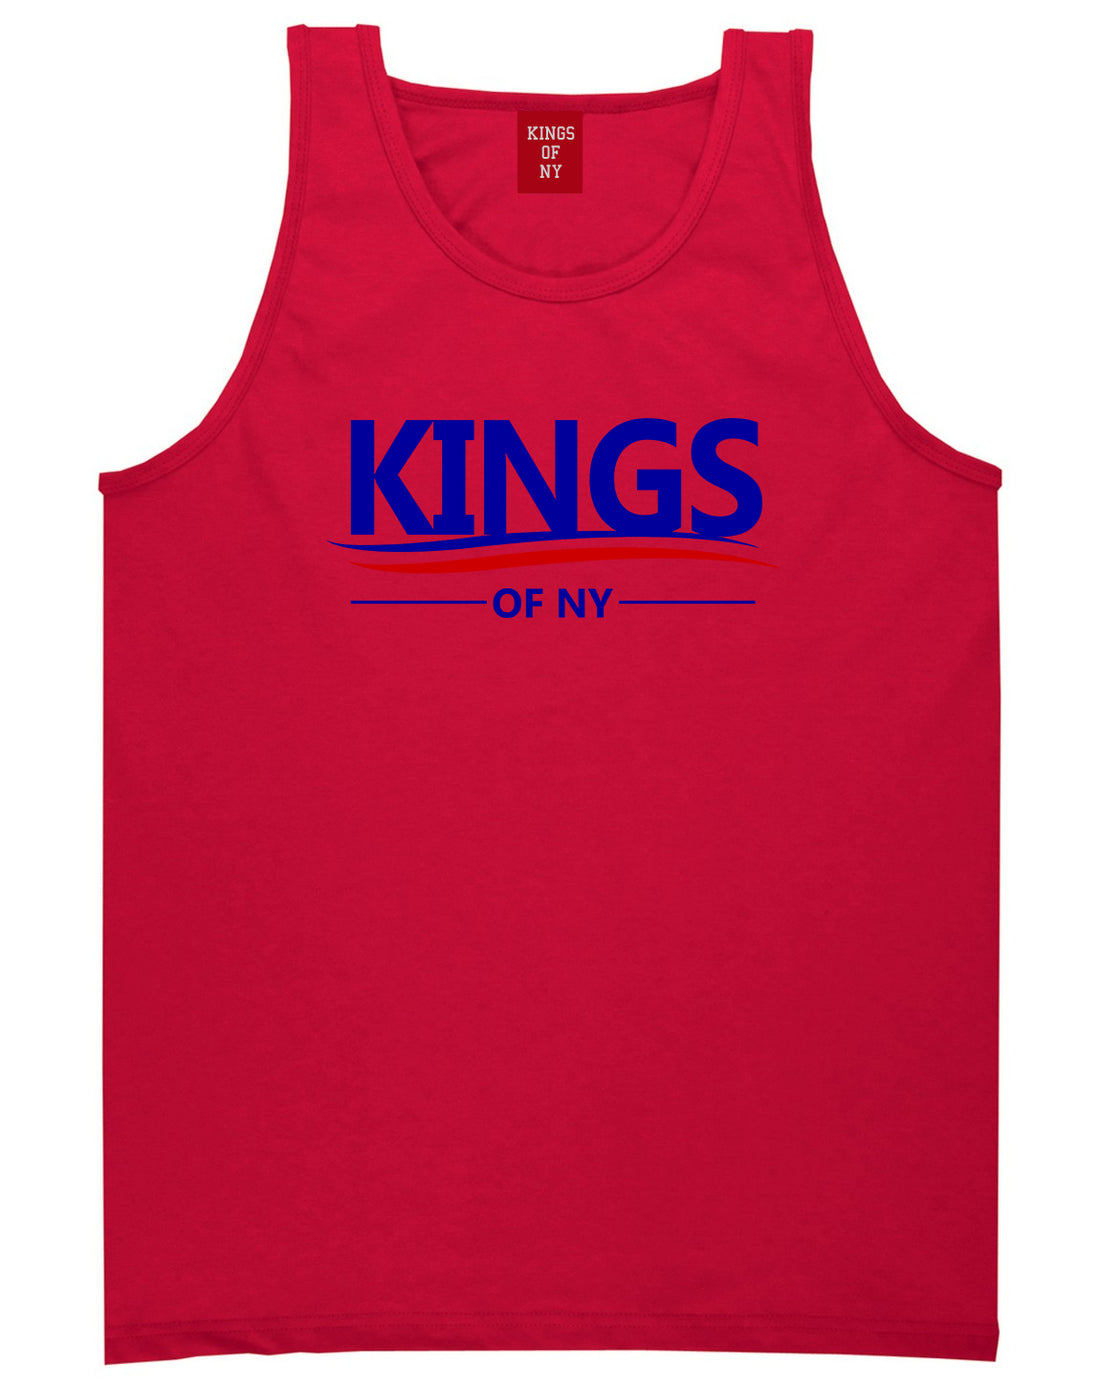 Kings Of NY Campaign Logo Tank Top Shirt in Red